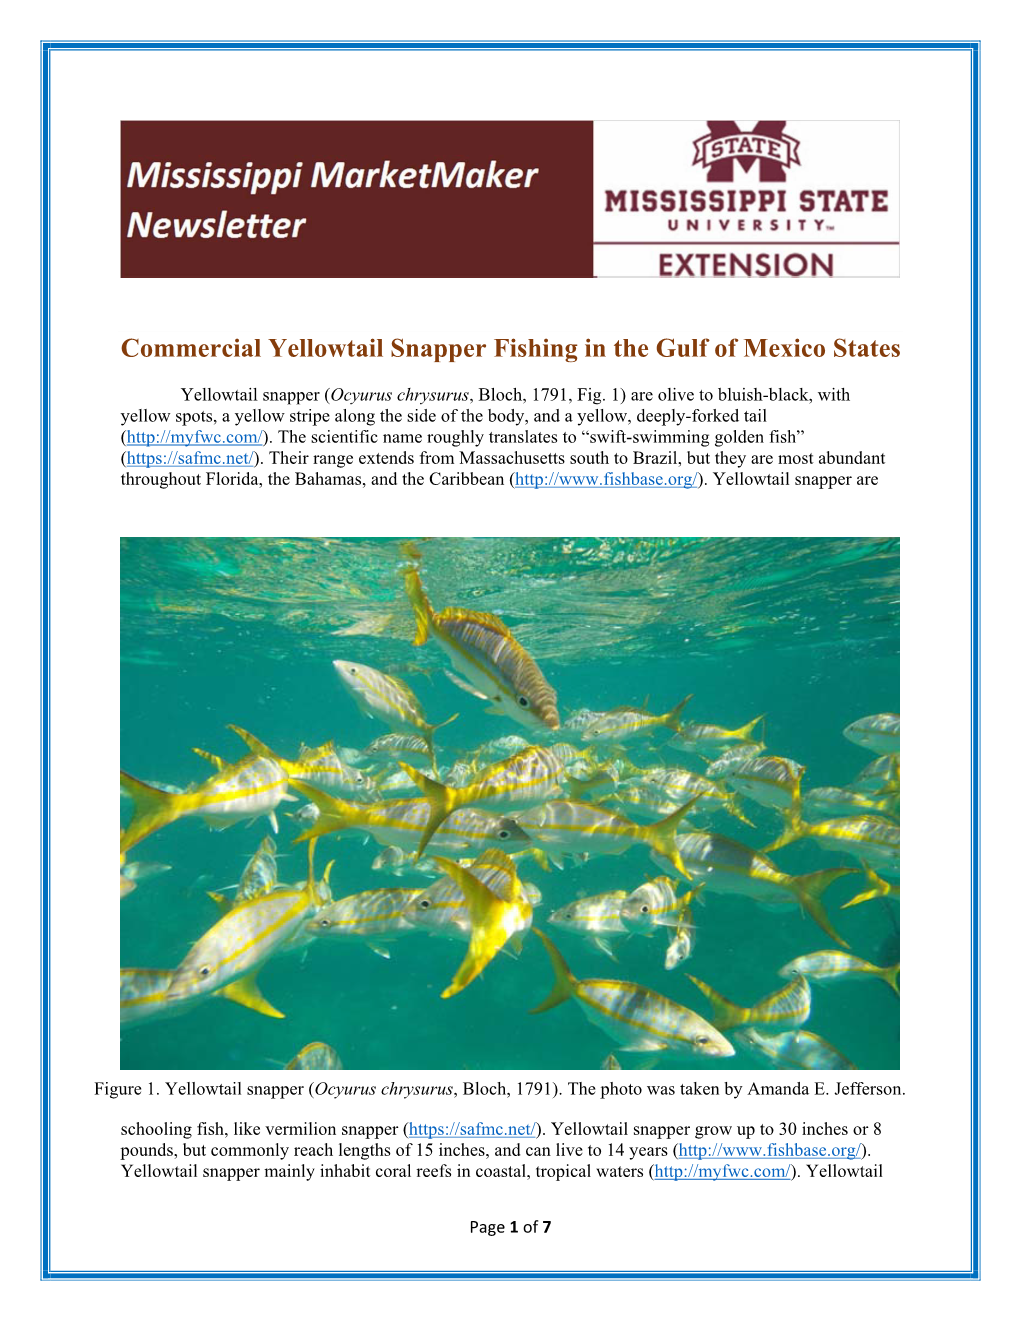 Commercial Yellowtail Snapper Fishing in the Gulf of Mexico States